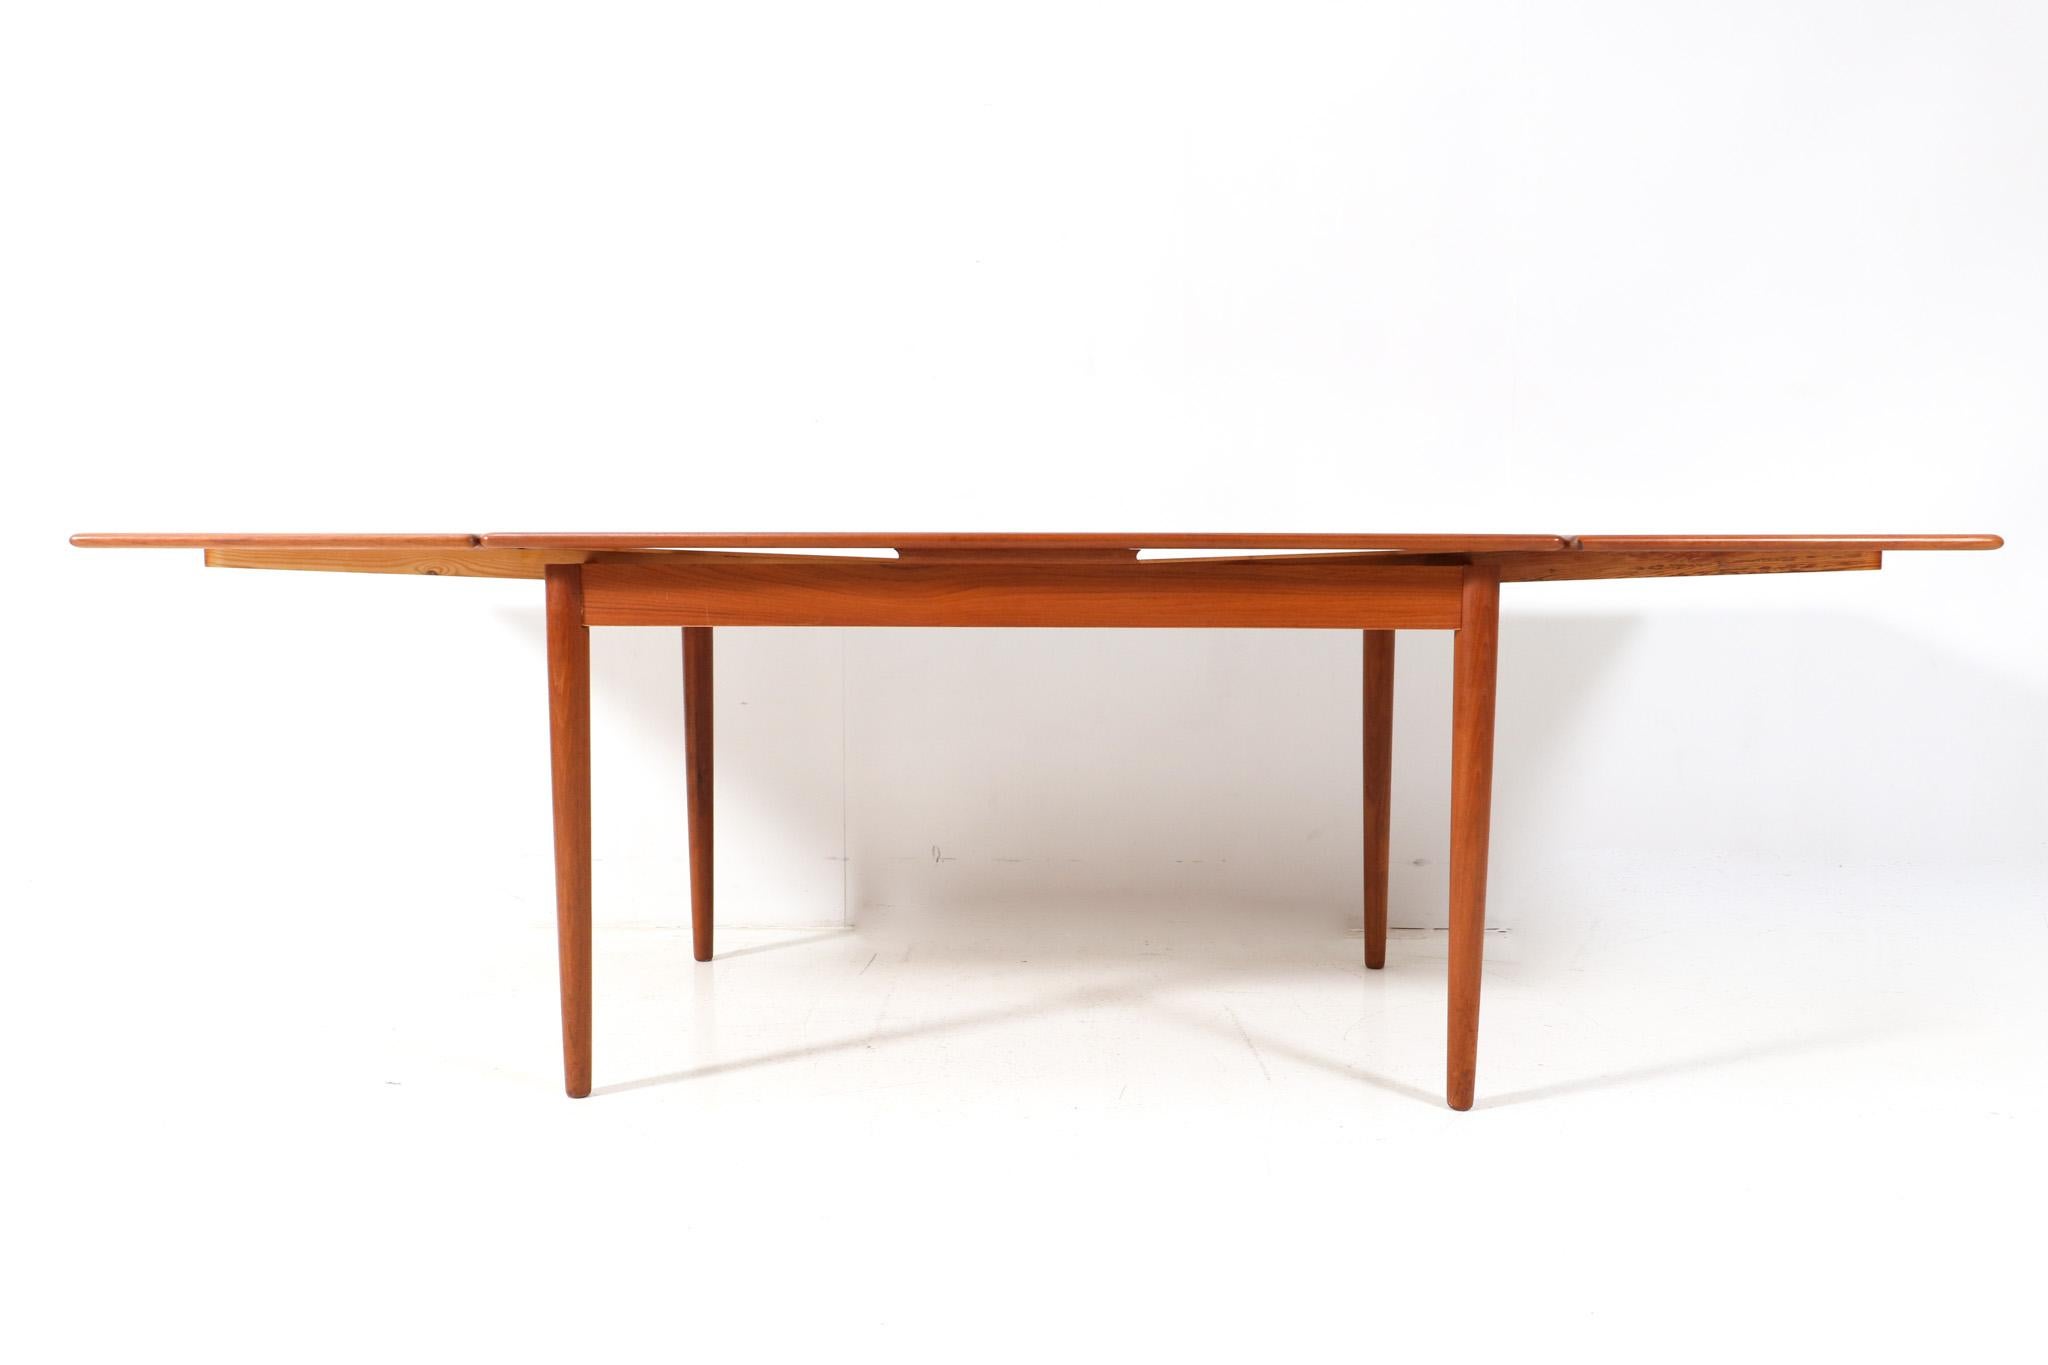 Teak Mid-Century Modern Extendable Dining Room Table Mo. 215 by Farstrup, 1960s For Sale 1